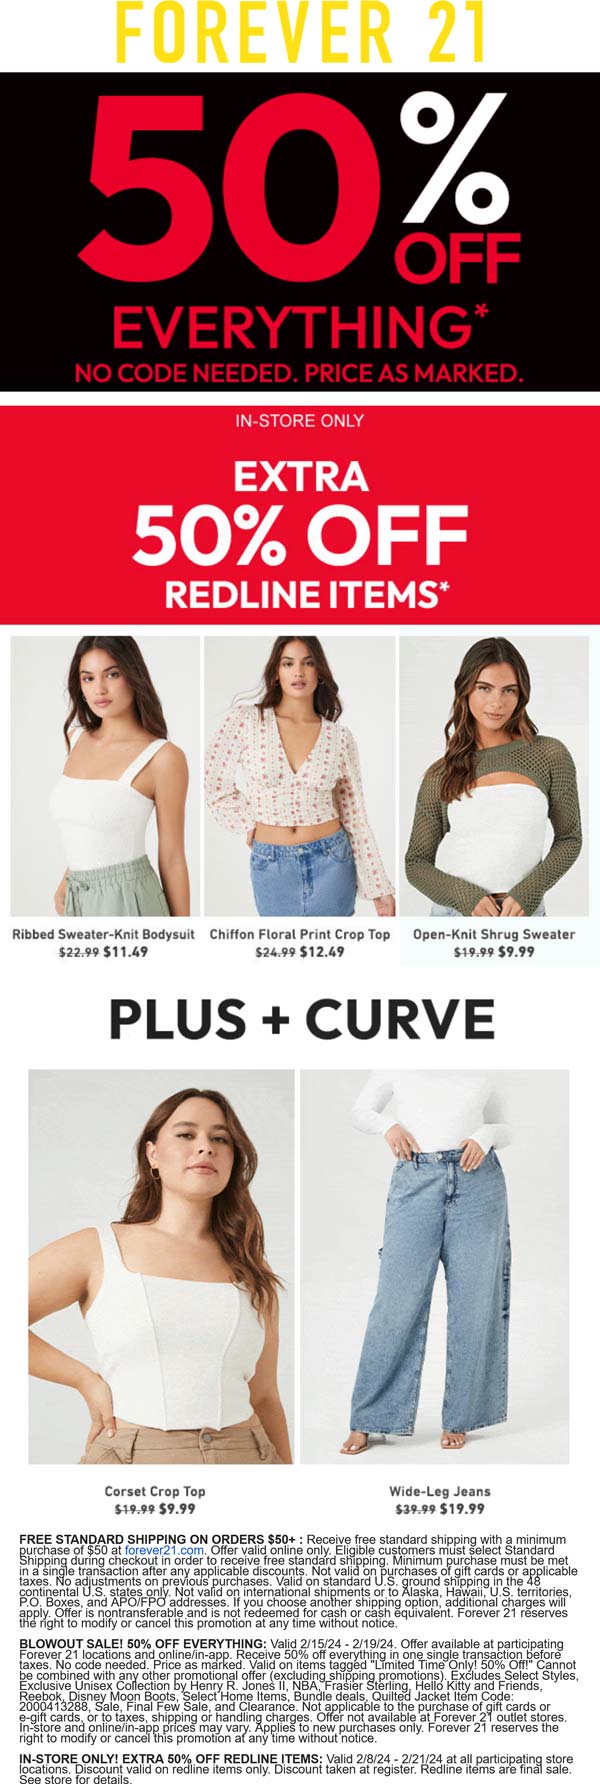 Forever 21 stores Coupon  50% off everything at Forever 21, ditto online #forever21 